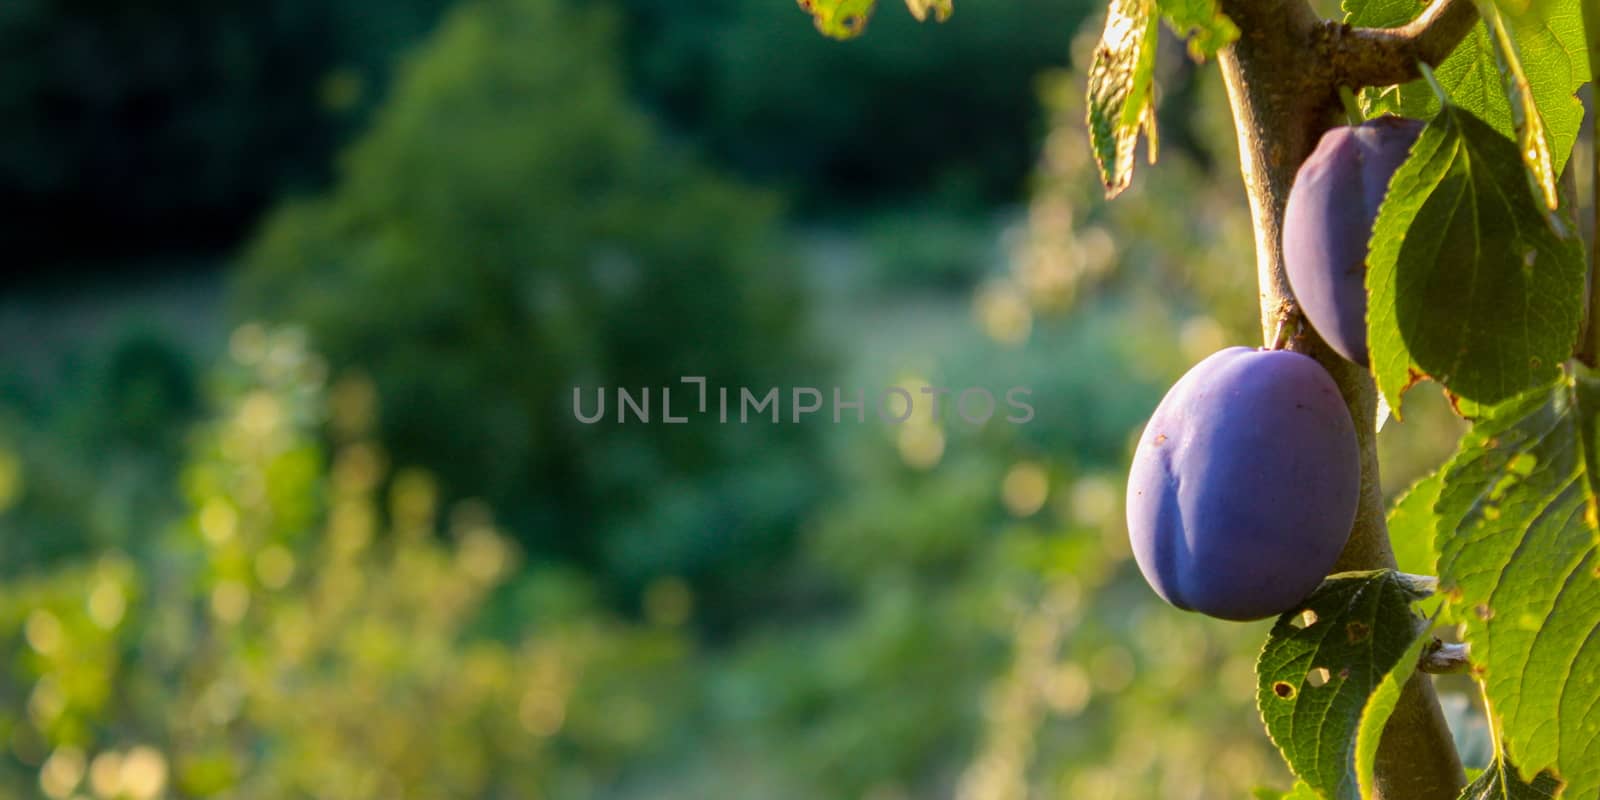 Banner. Plums on a branch with leaves in a plum orchard. Ripe plums. Copy text. Blurred background. Zavidovići, Bosnia and Herzegovina.